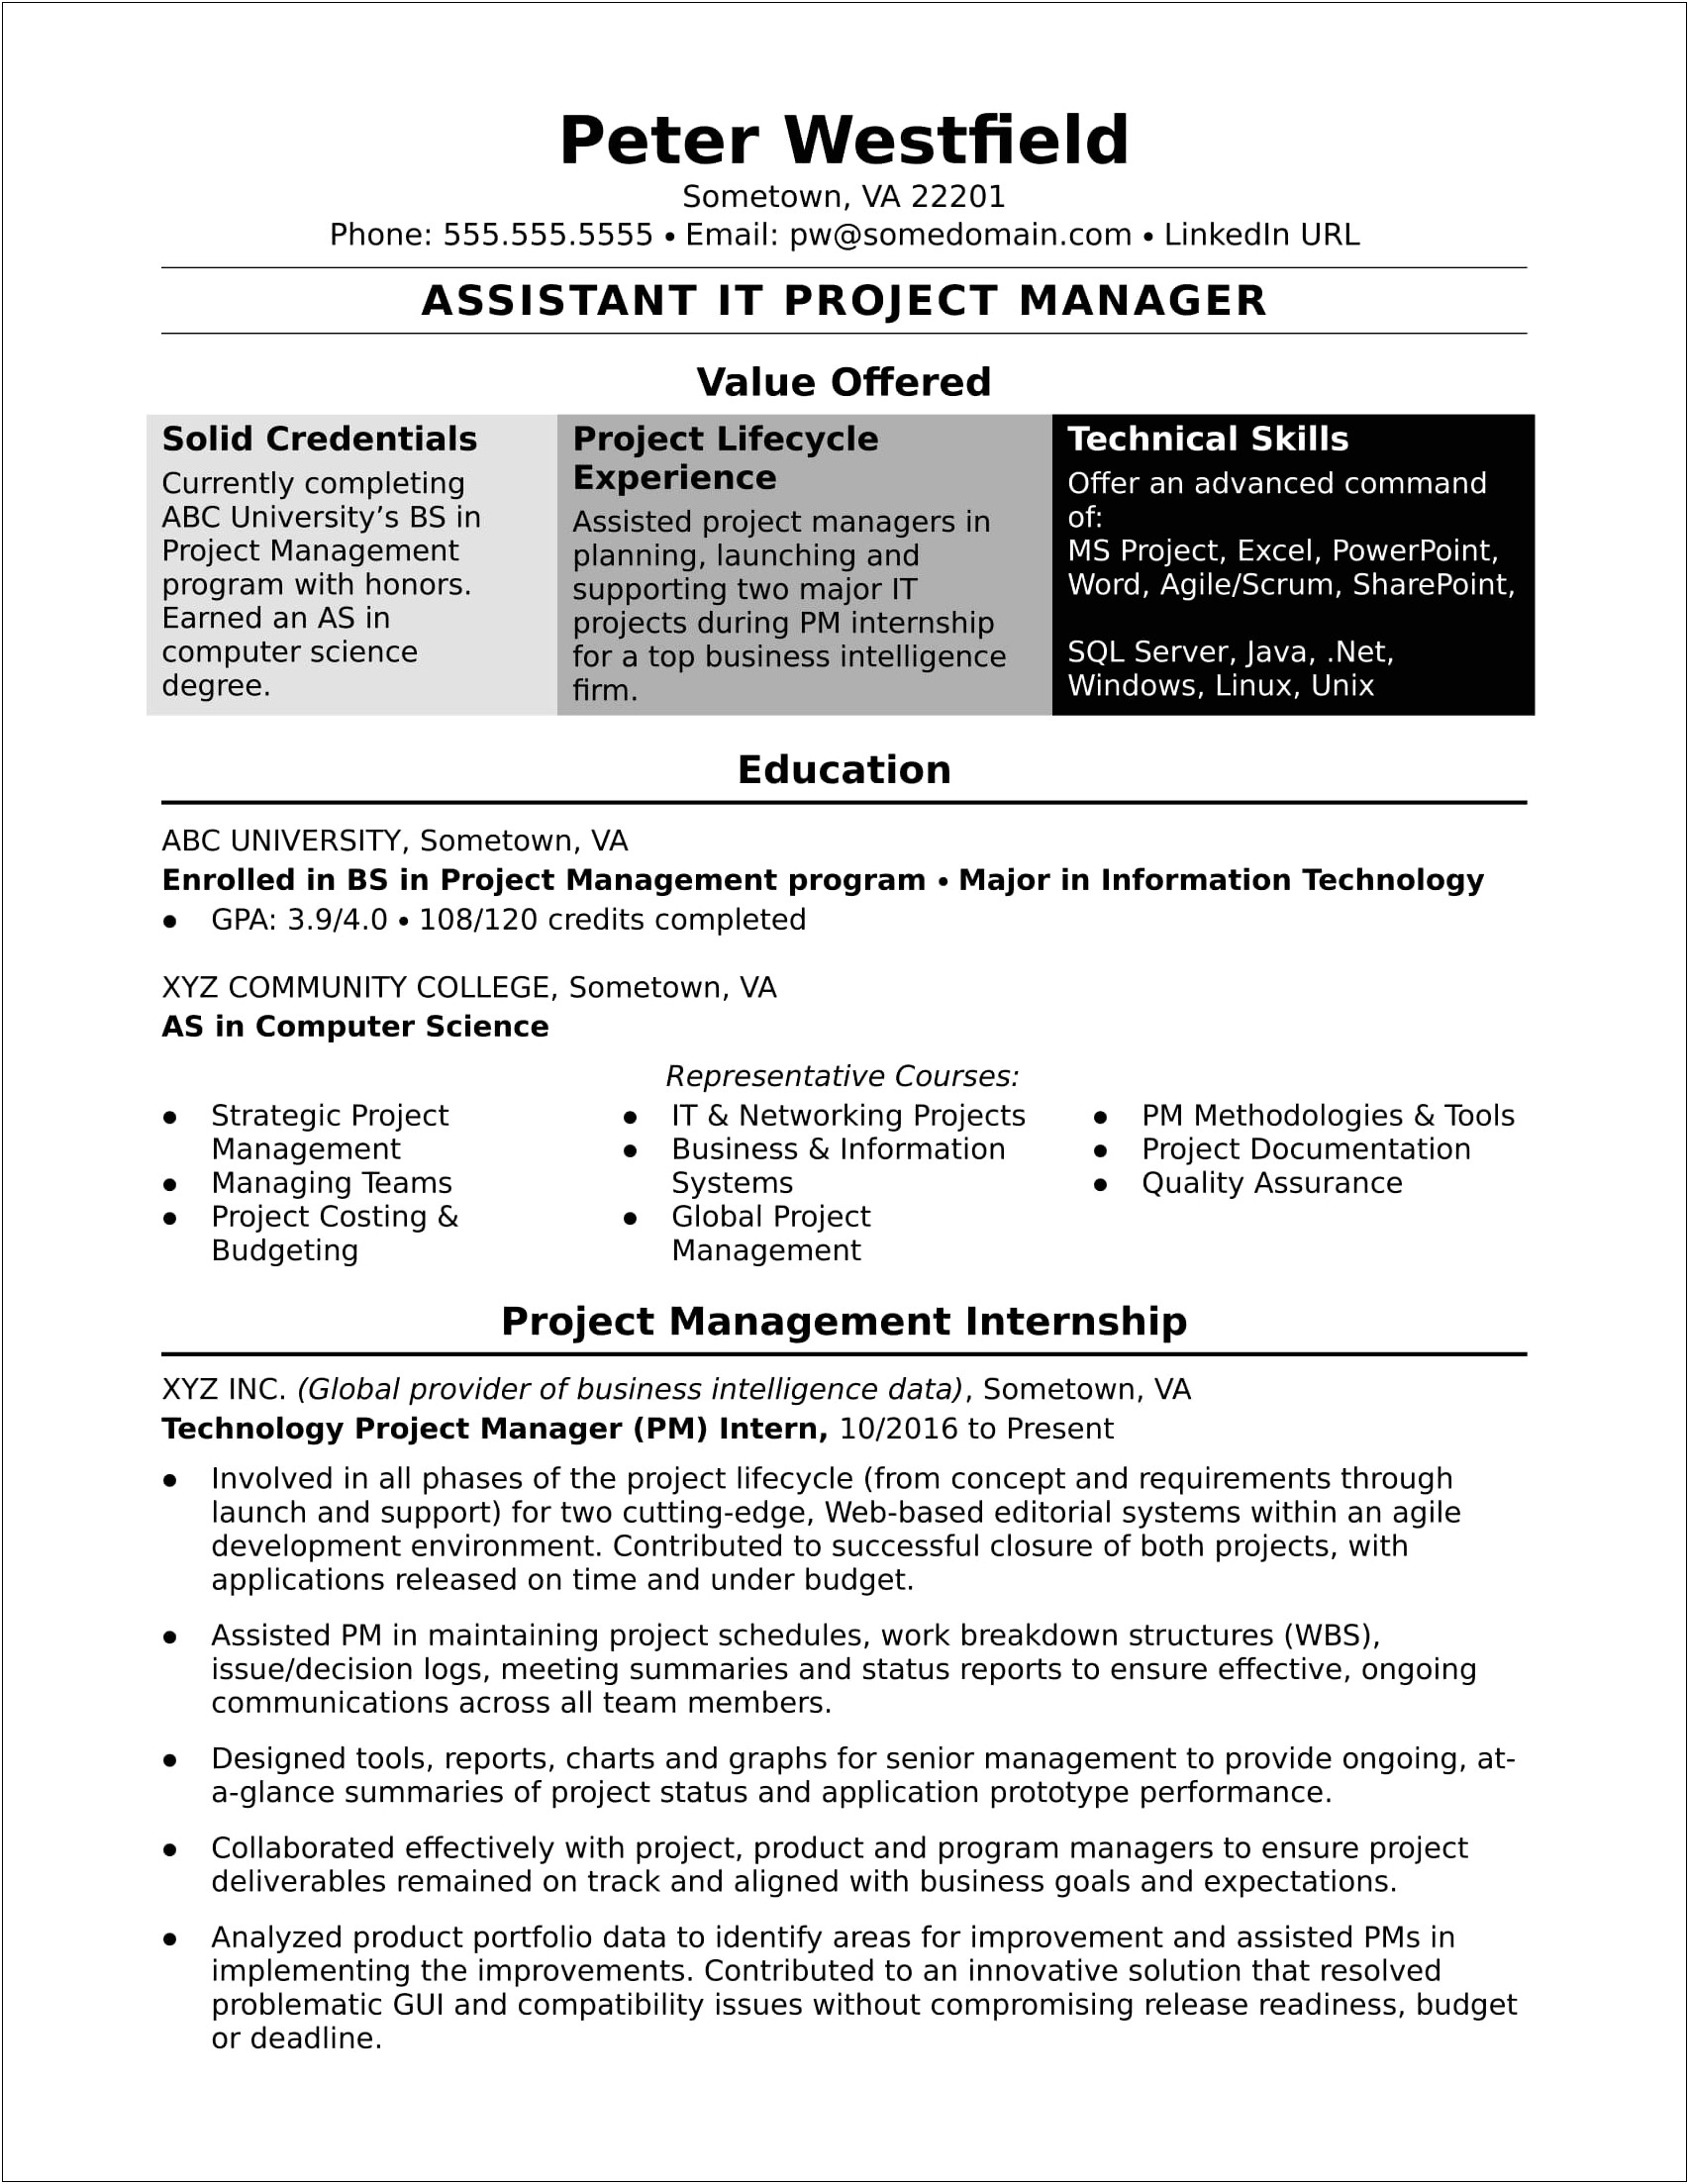 Resume Construction Assistant Project Manager